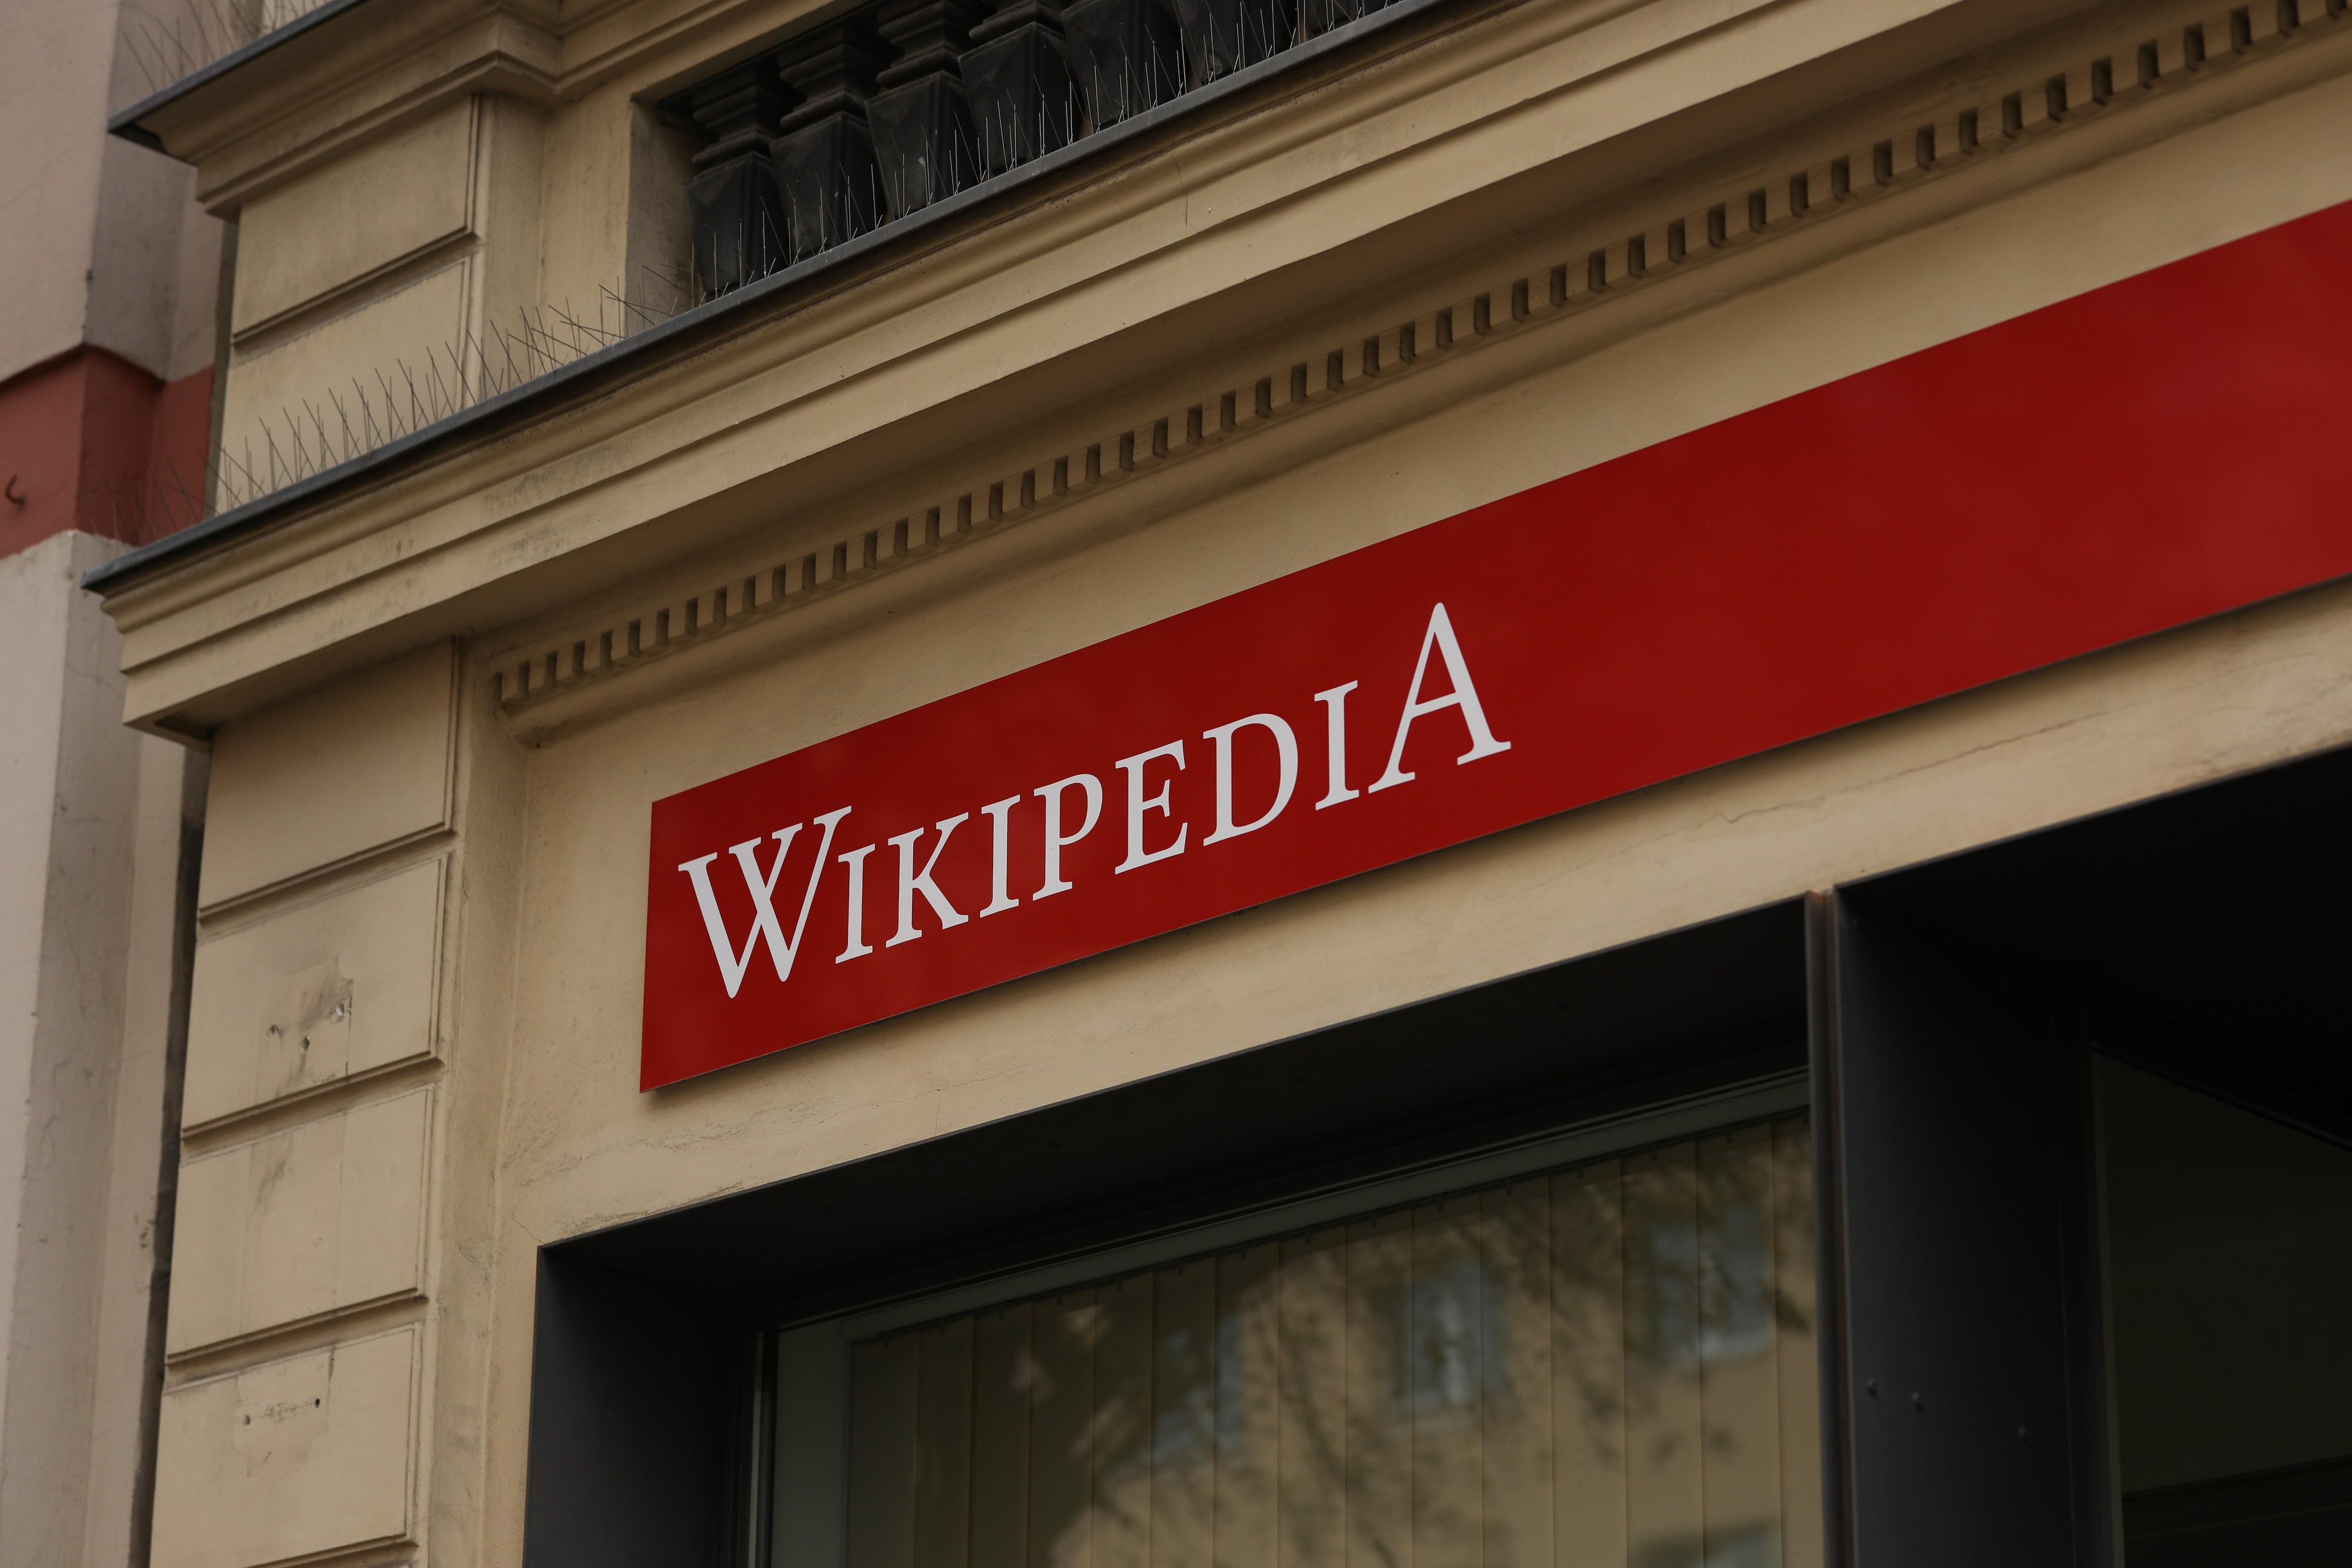 Beyond the hype: examining the relationship between Wikipedia